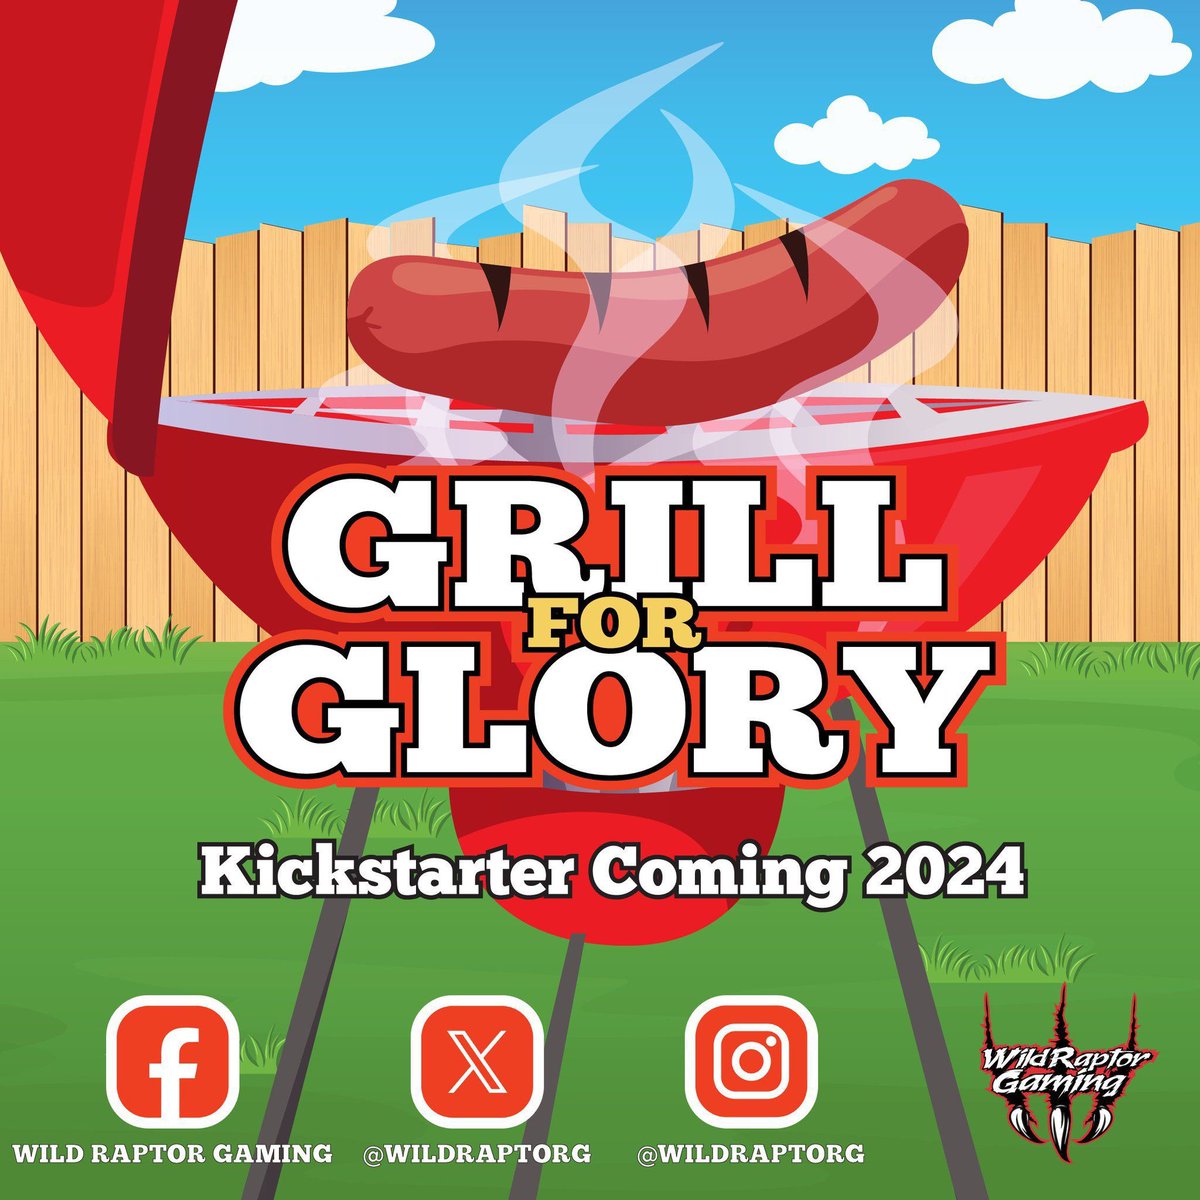 Be sure to follow us on all of our social media for more updates with Grill for Glory! 

#cardgame #boardgame #boardgames #cardgames  #boardgamegeek #tabletopgames #game #games #cards  #gaming #tabletop  #gamenight #boardgamesofinstagram #card #boardgamer #boardgameaddict